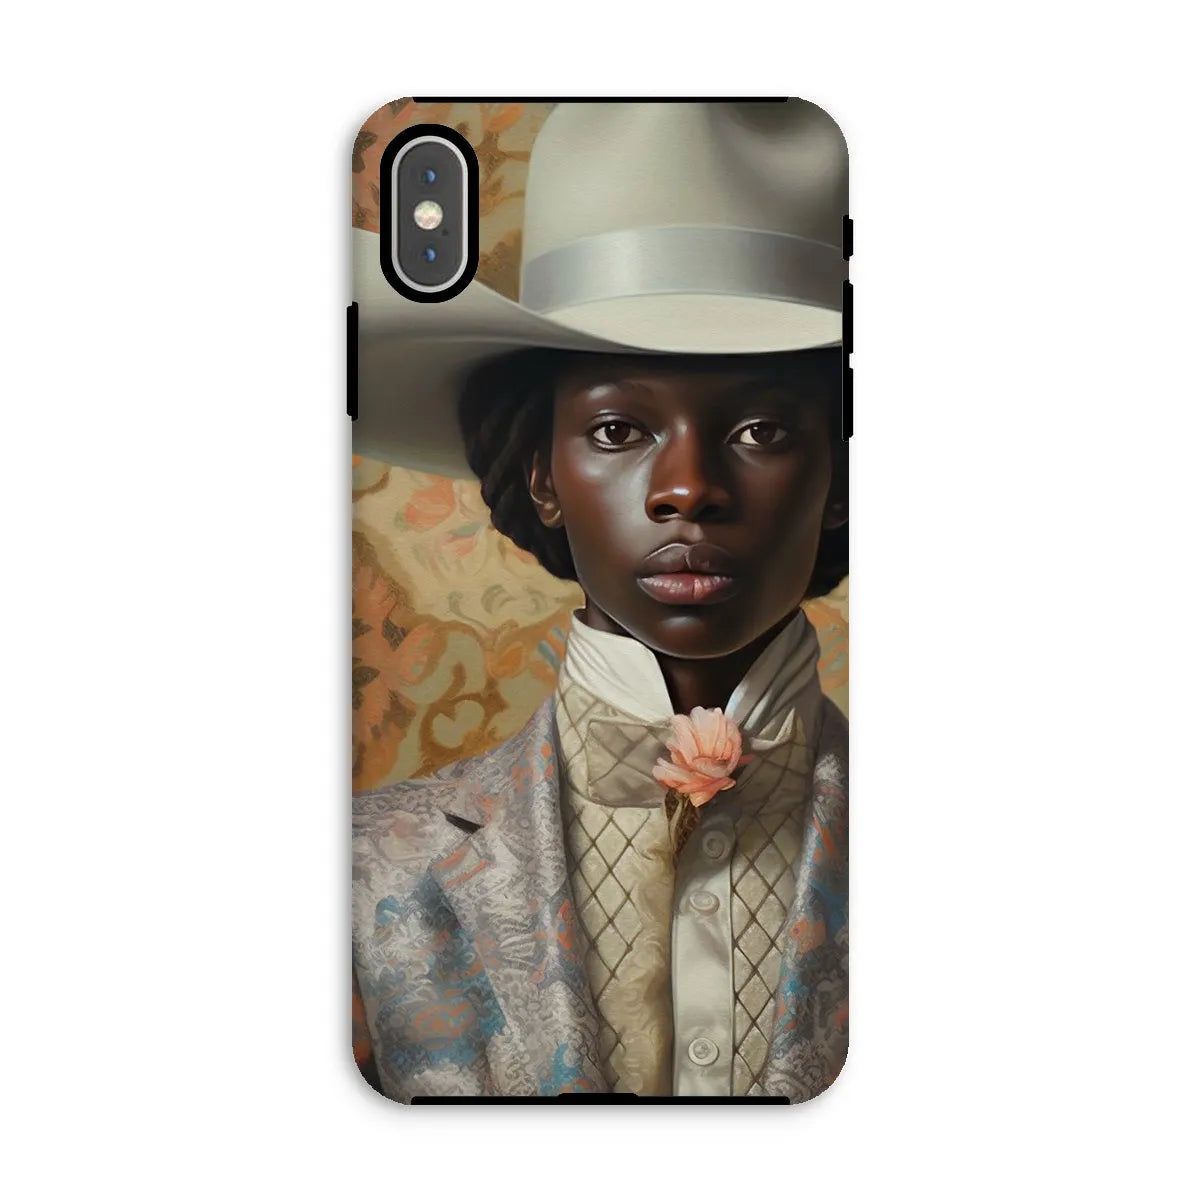 Caesar The Gay Cowboy - Gay Aesthetic Art Phone Case - Iphone Xs Max / Matte - Mobile Phone Cases - Aesthetic Art